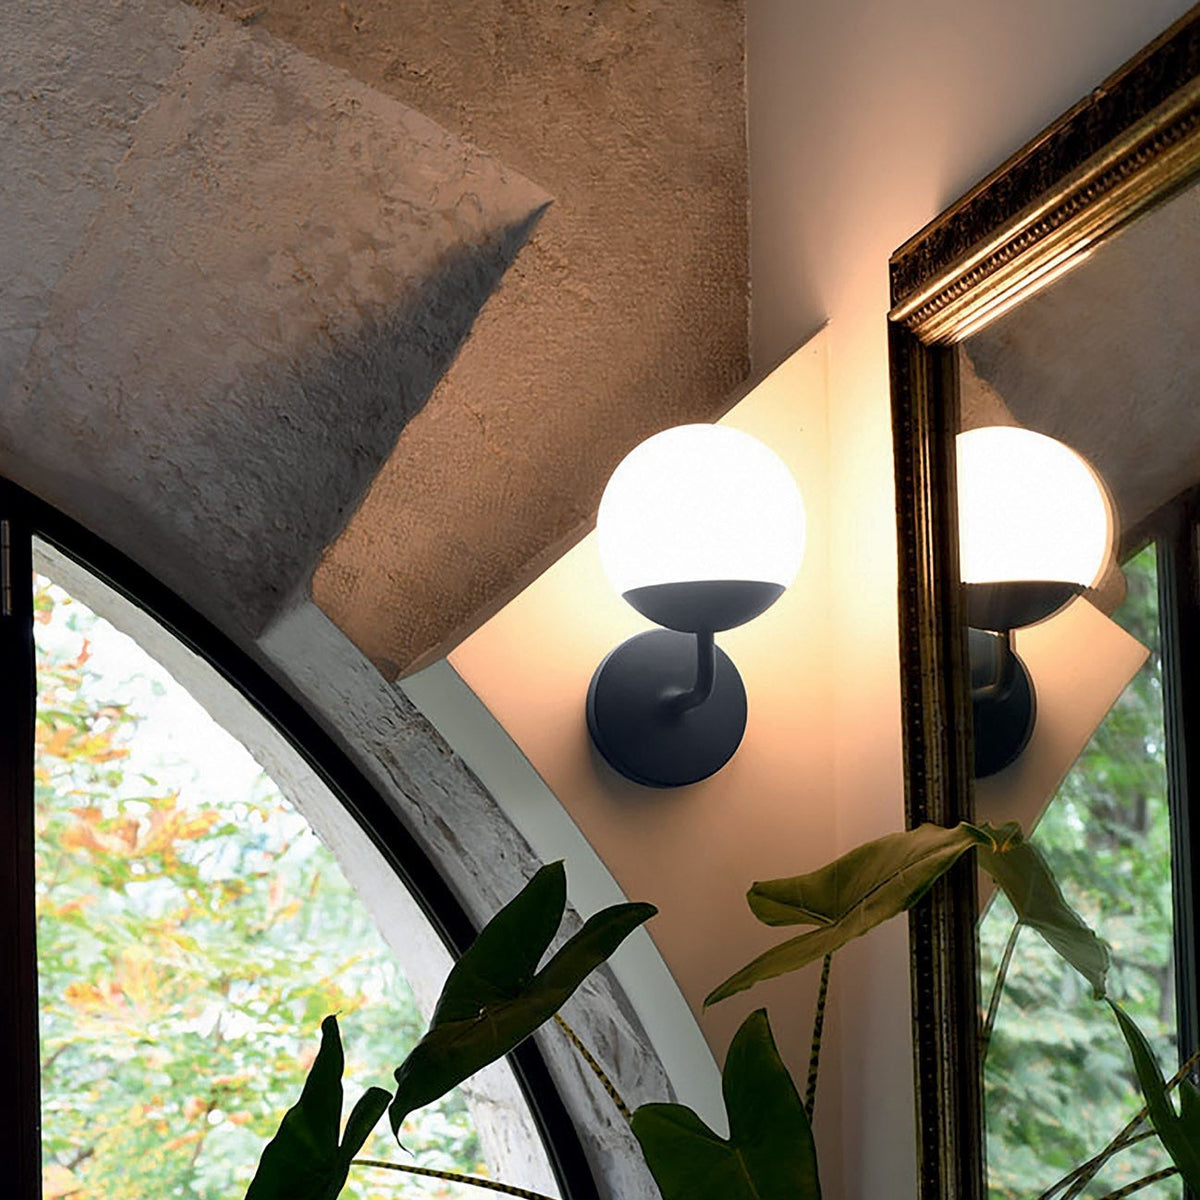 The Fermob Mooon! Wall Lamp in Anthracite.   Fixed to a garden room wall, surrounded by windows and greenery.